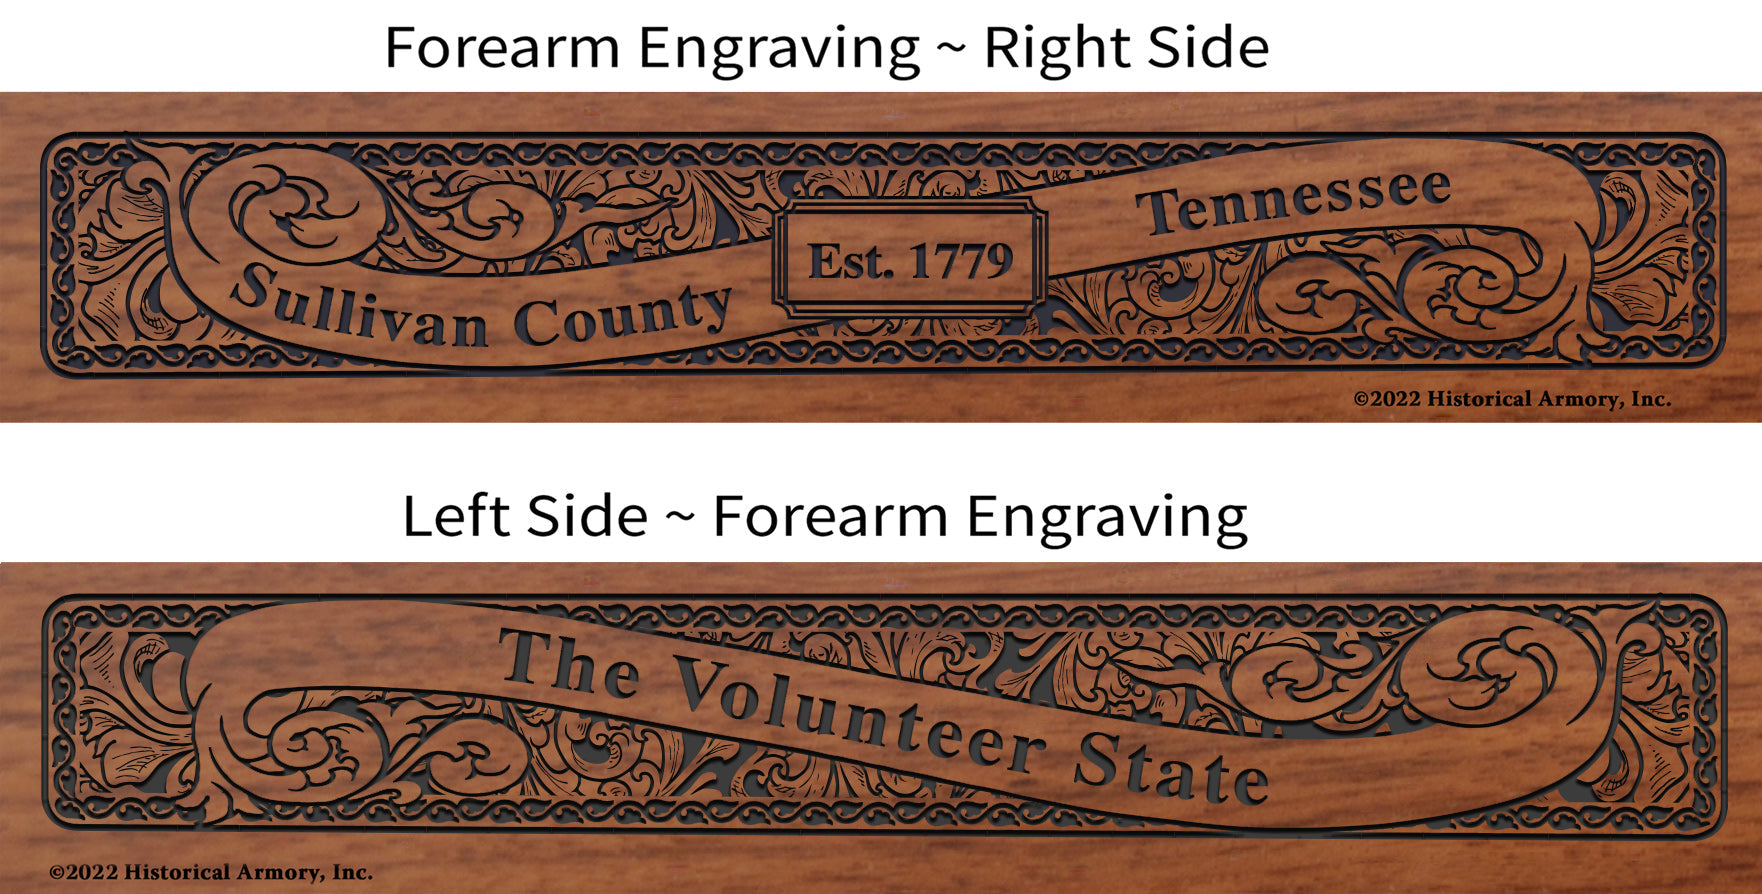 Sullivan County Tennessee Engraved Rifle Forearm